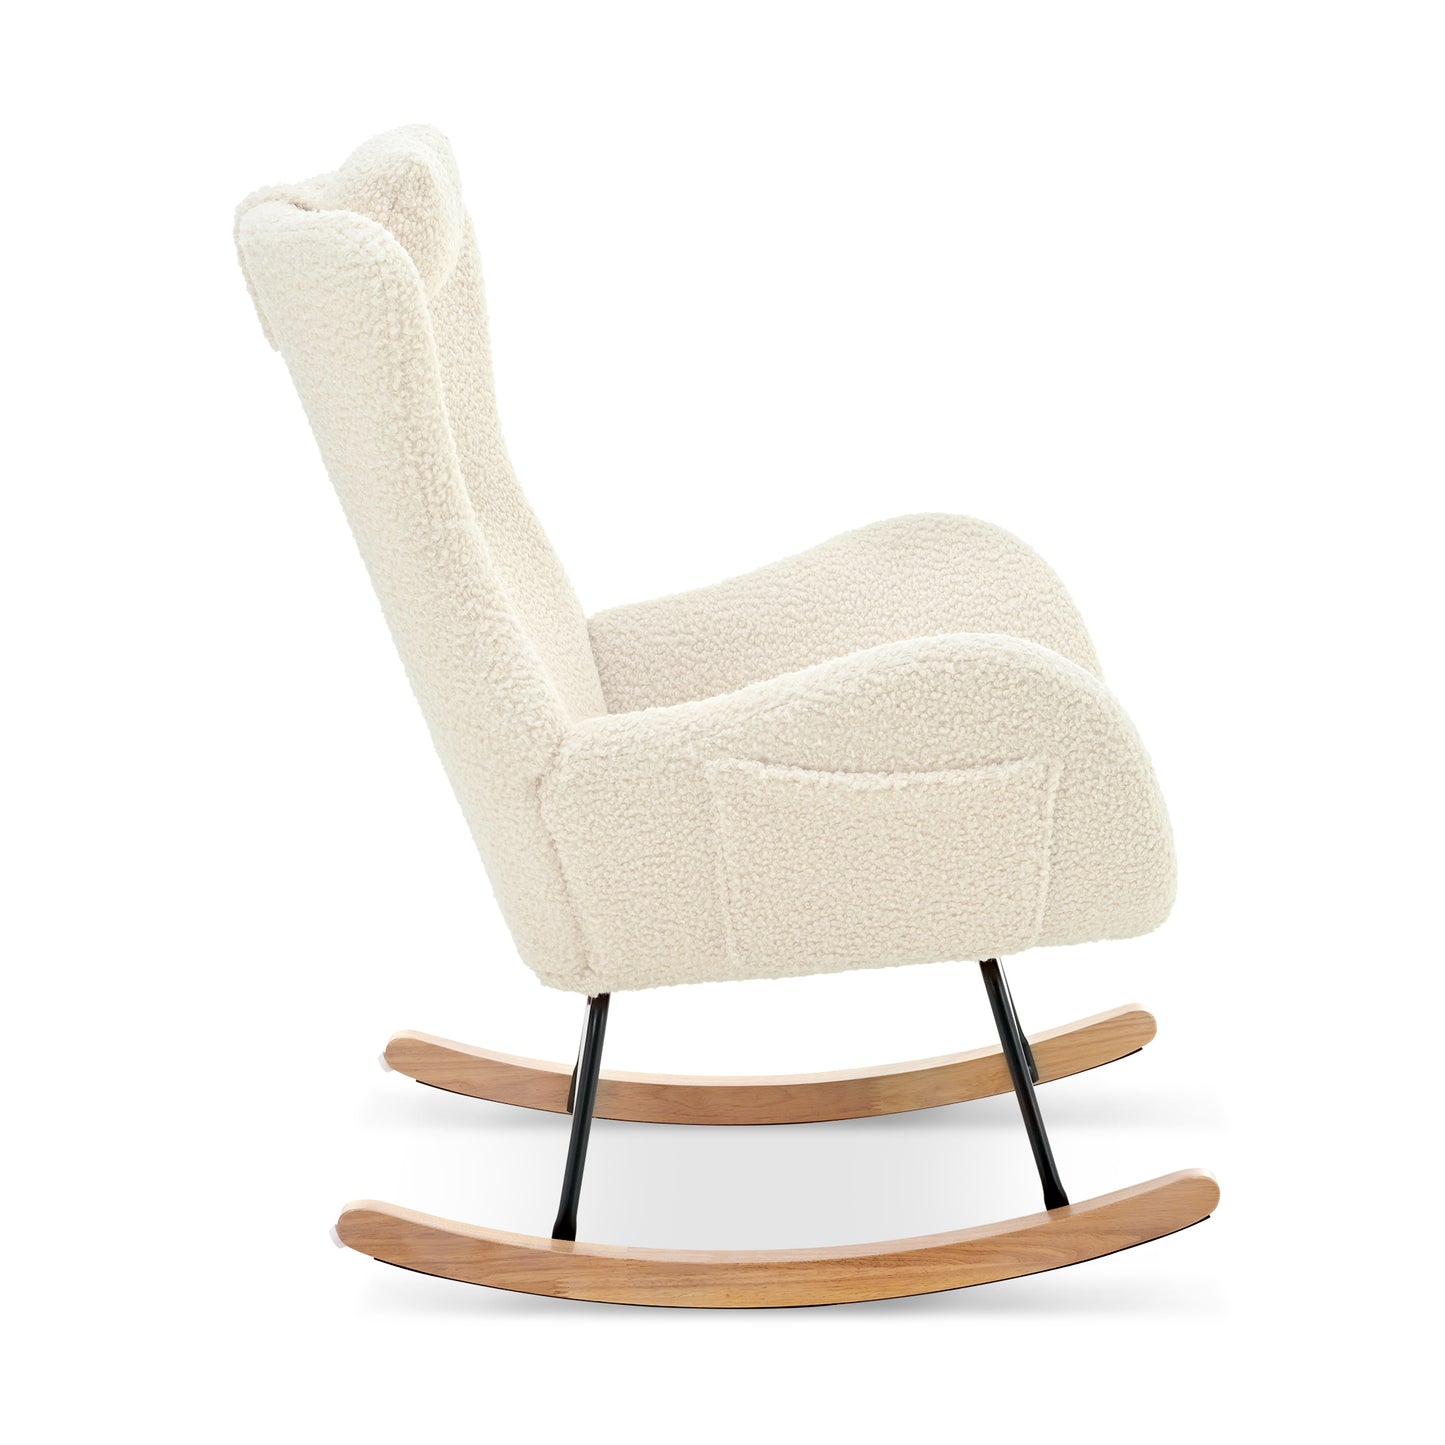 Rocking Chair with rubber leg and cashmere fabric